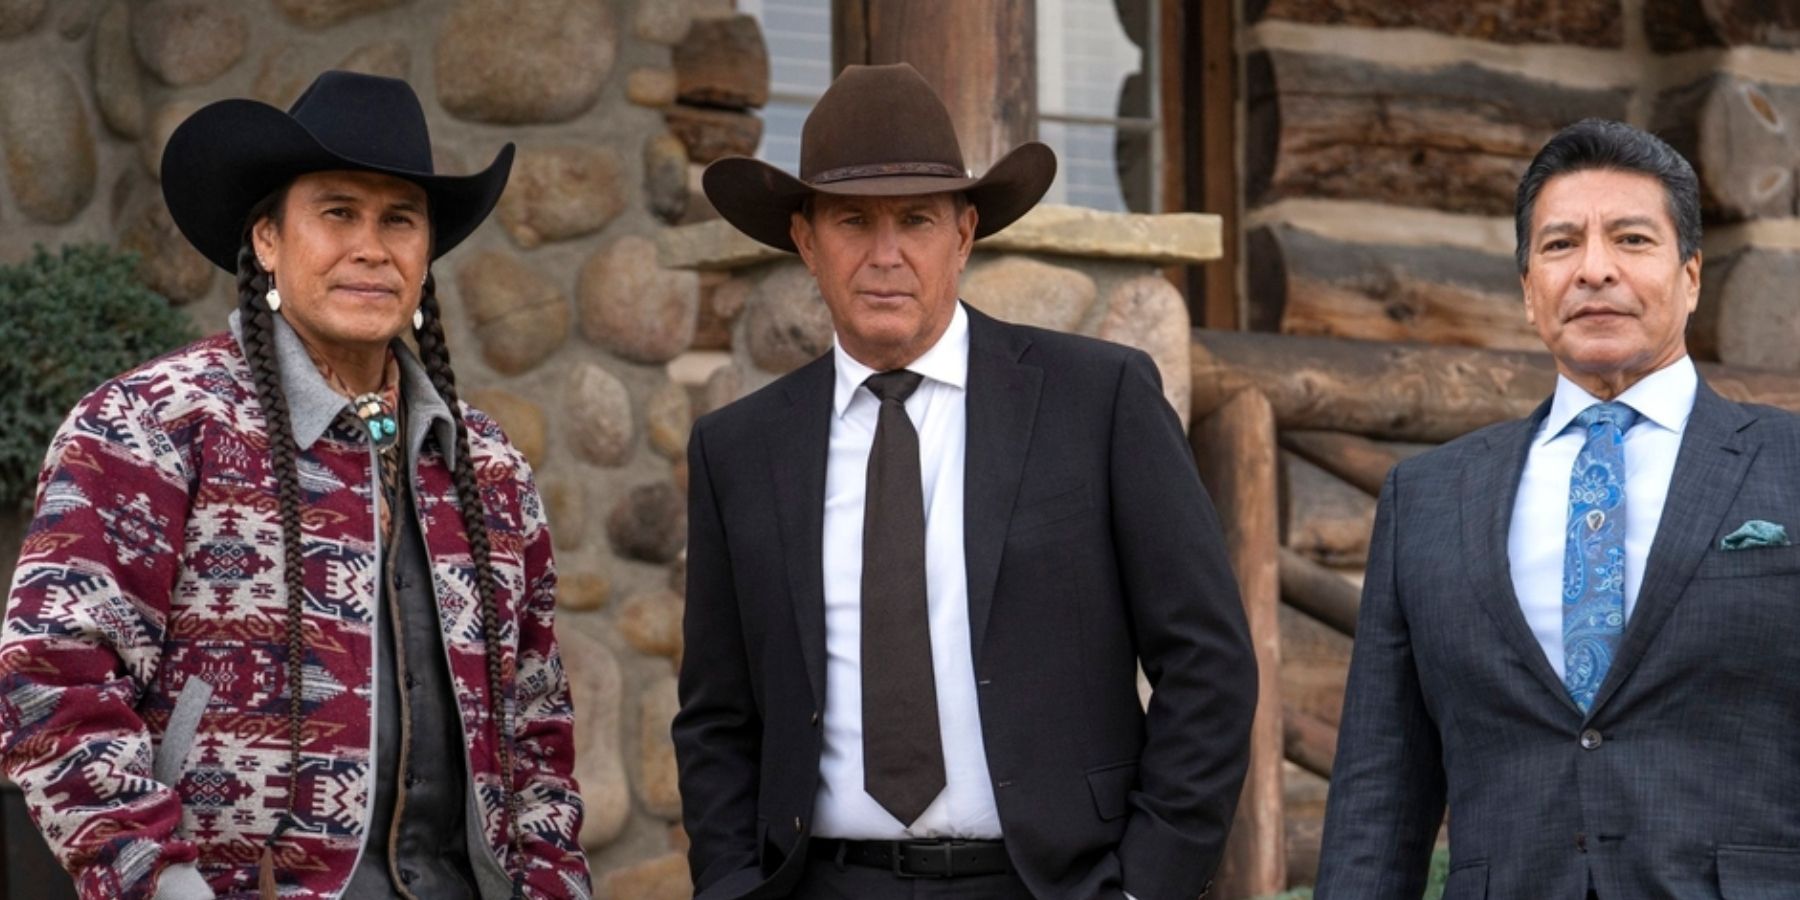 Mo Brings Plenty Kevin Costner Gil Birmingham pose together in Yellowstone